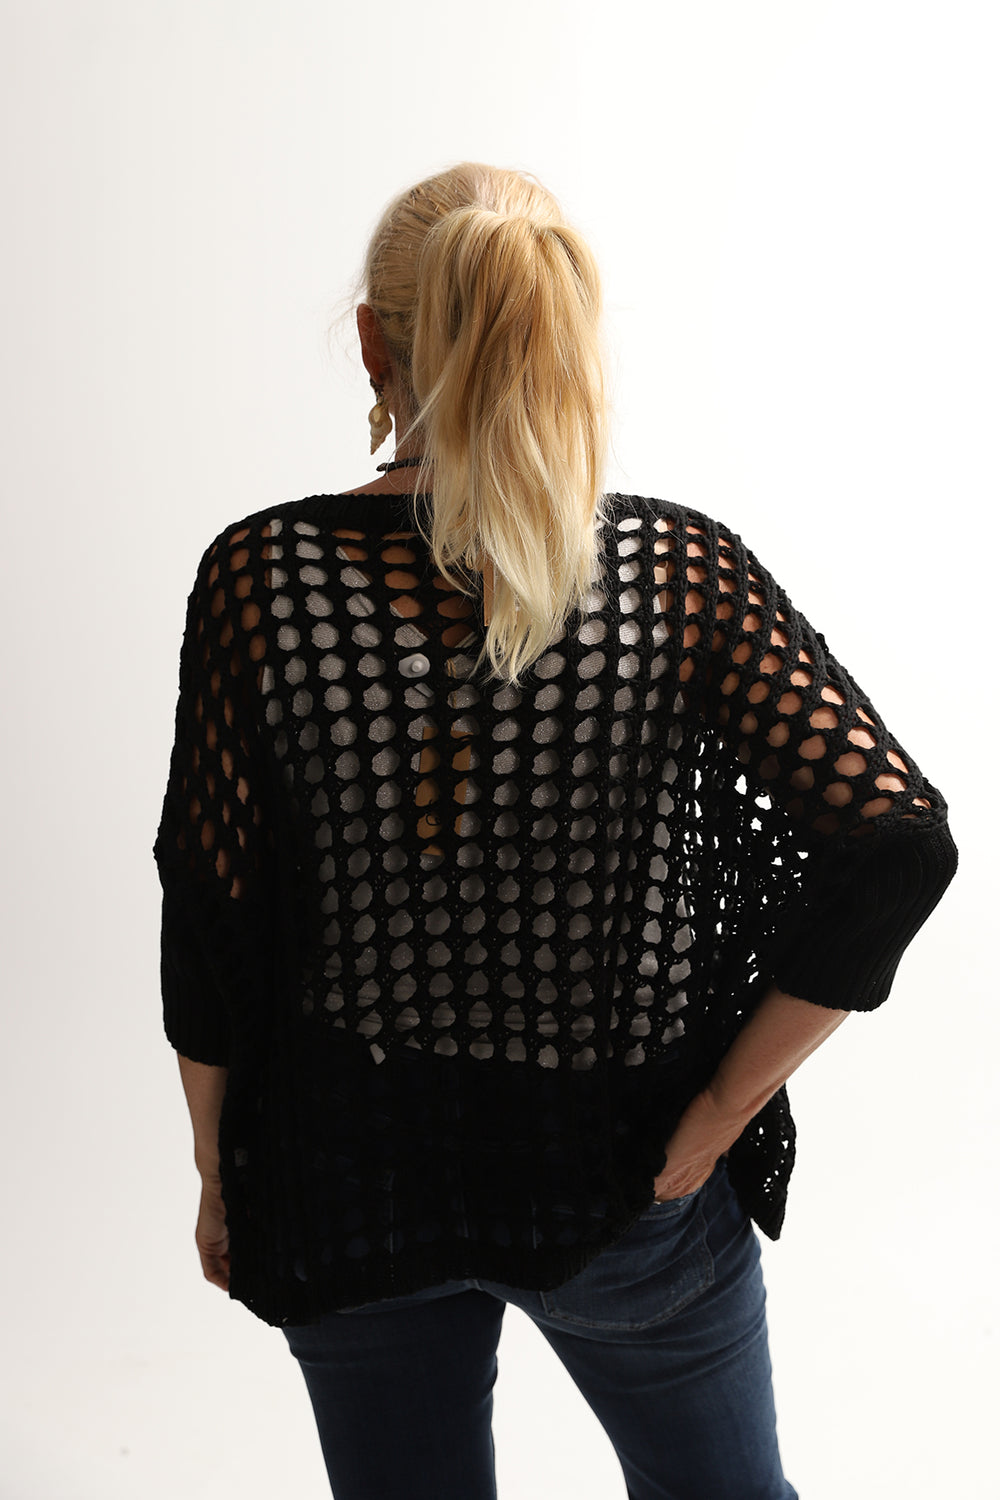 Boho crochet black top by Cindy-G, sold and shipped from Pizazz Boutique Nelson Bay women's dresses online Australia